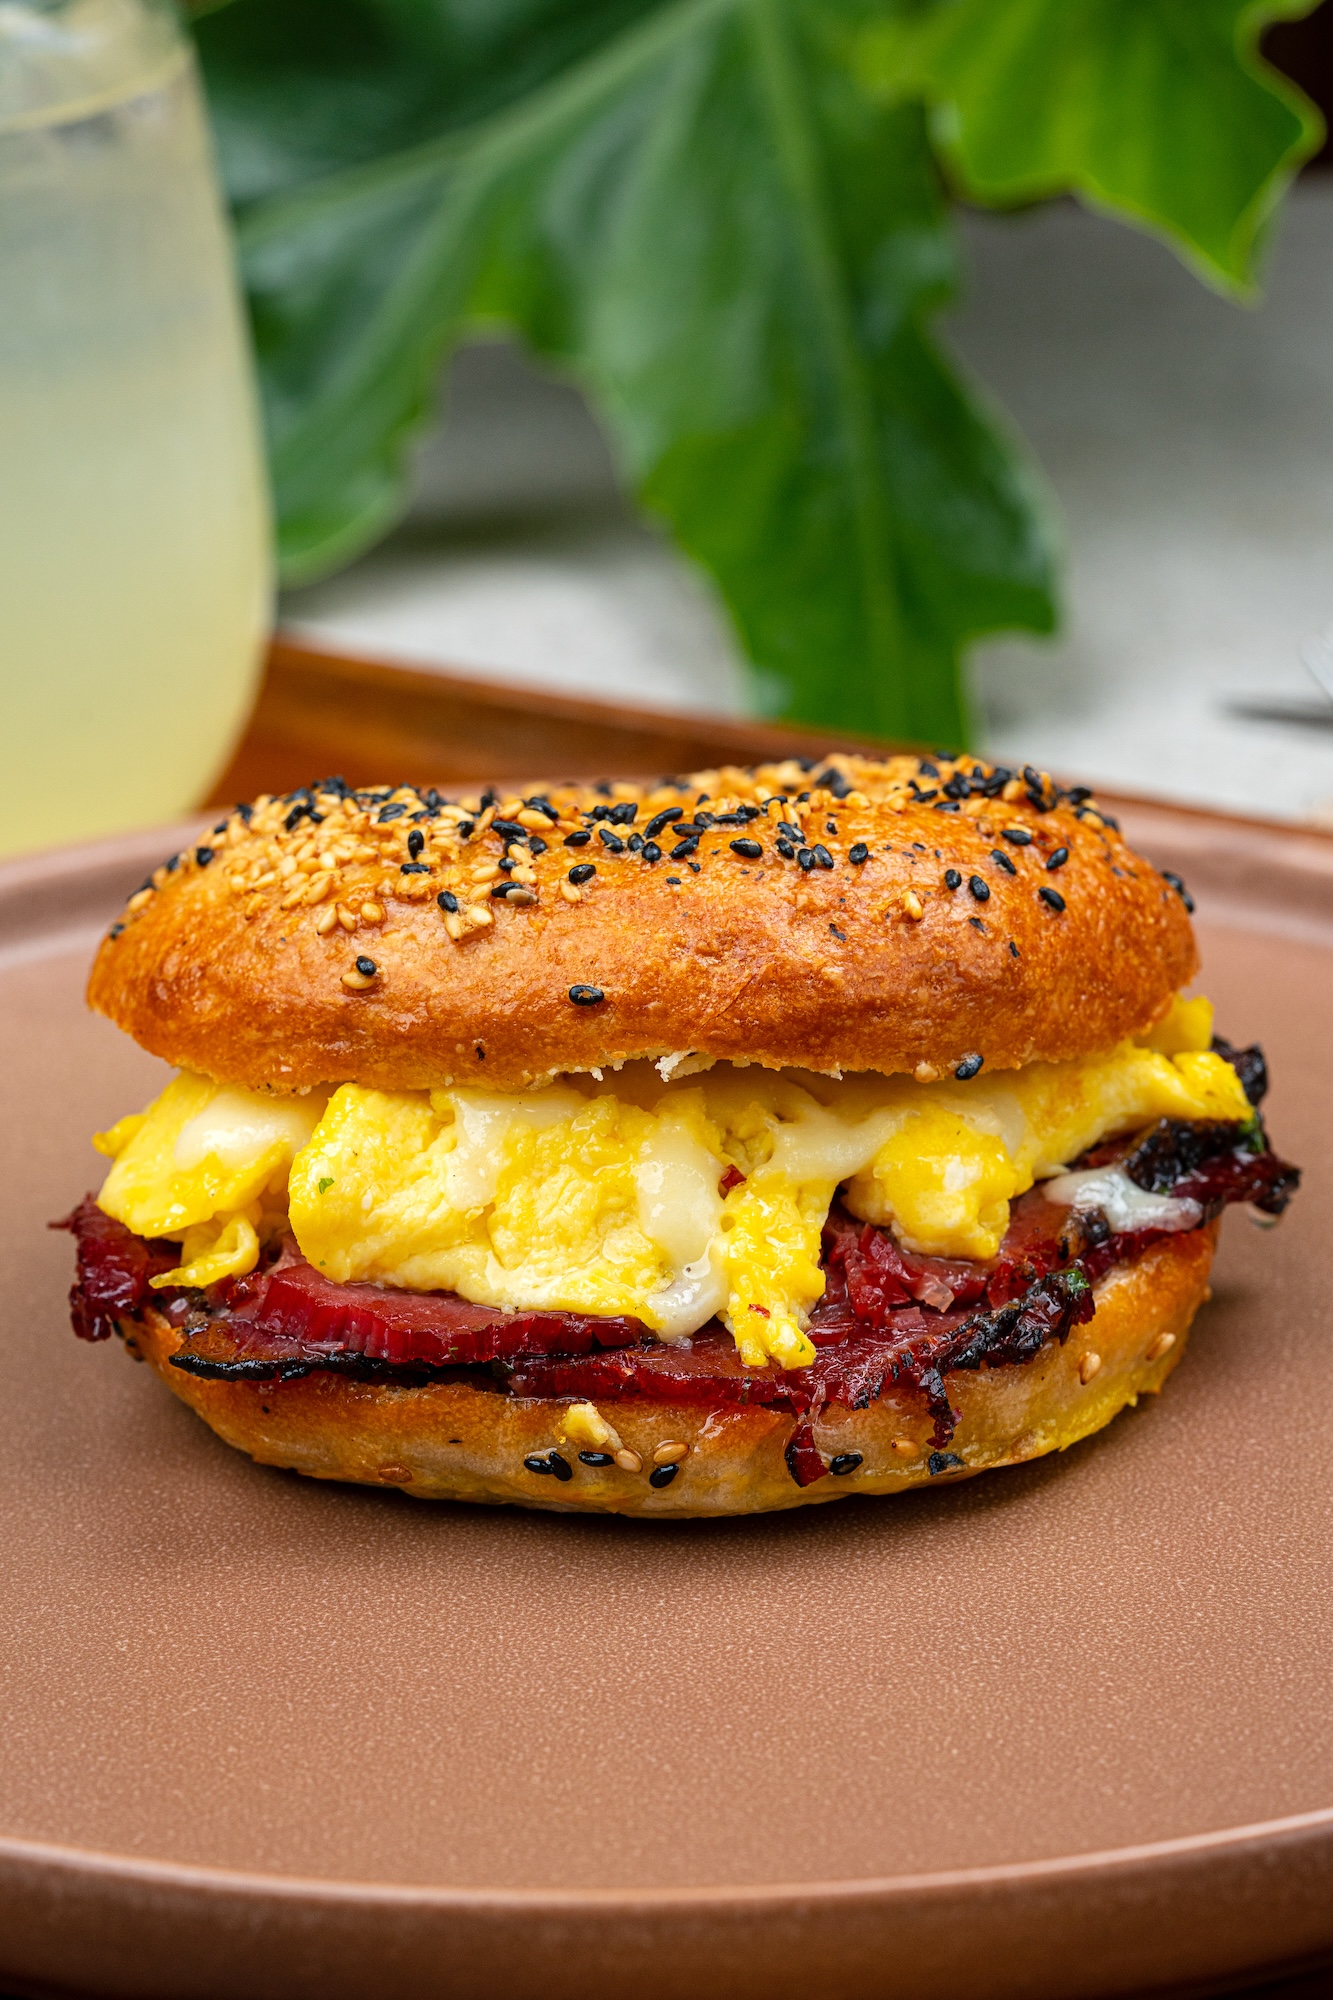 Pastrami egg and cheese bagel